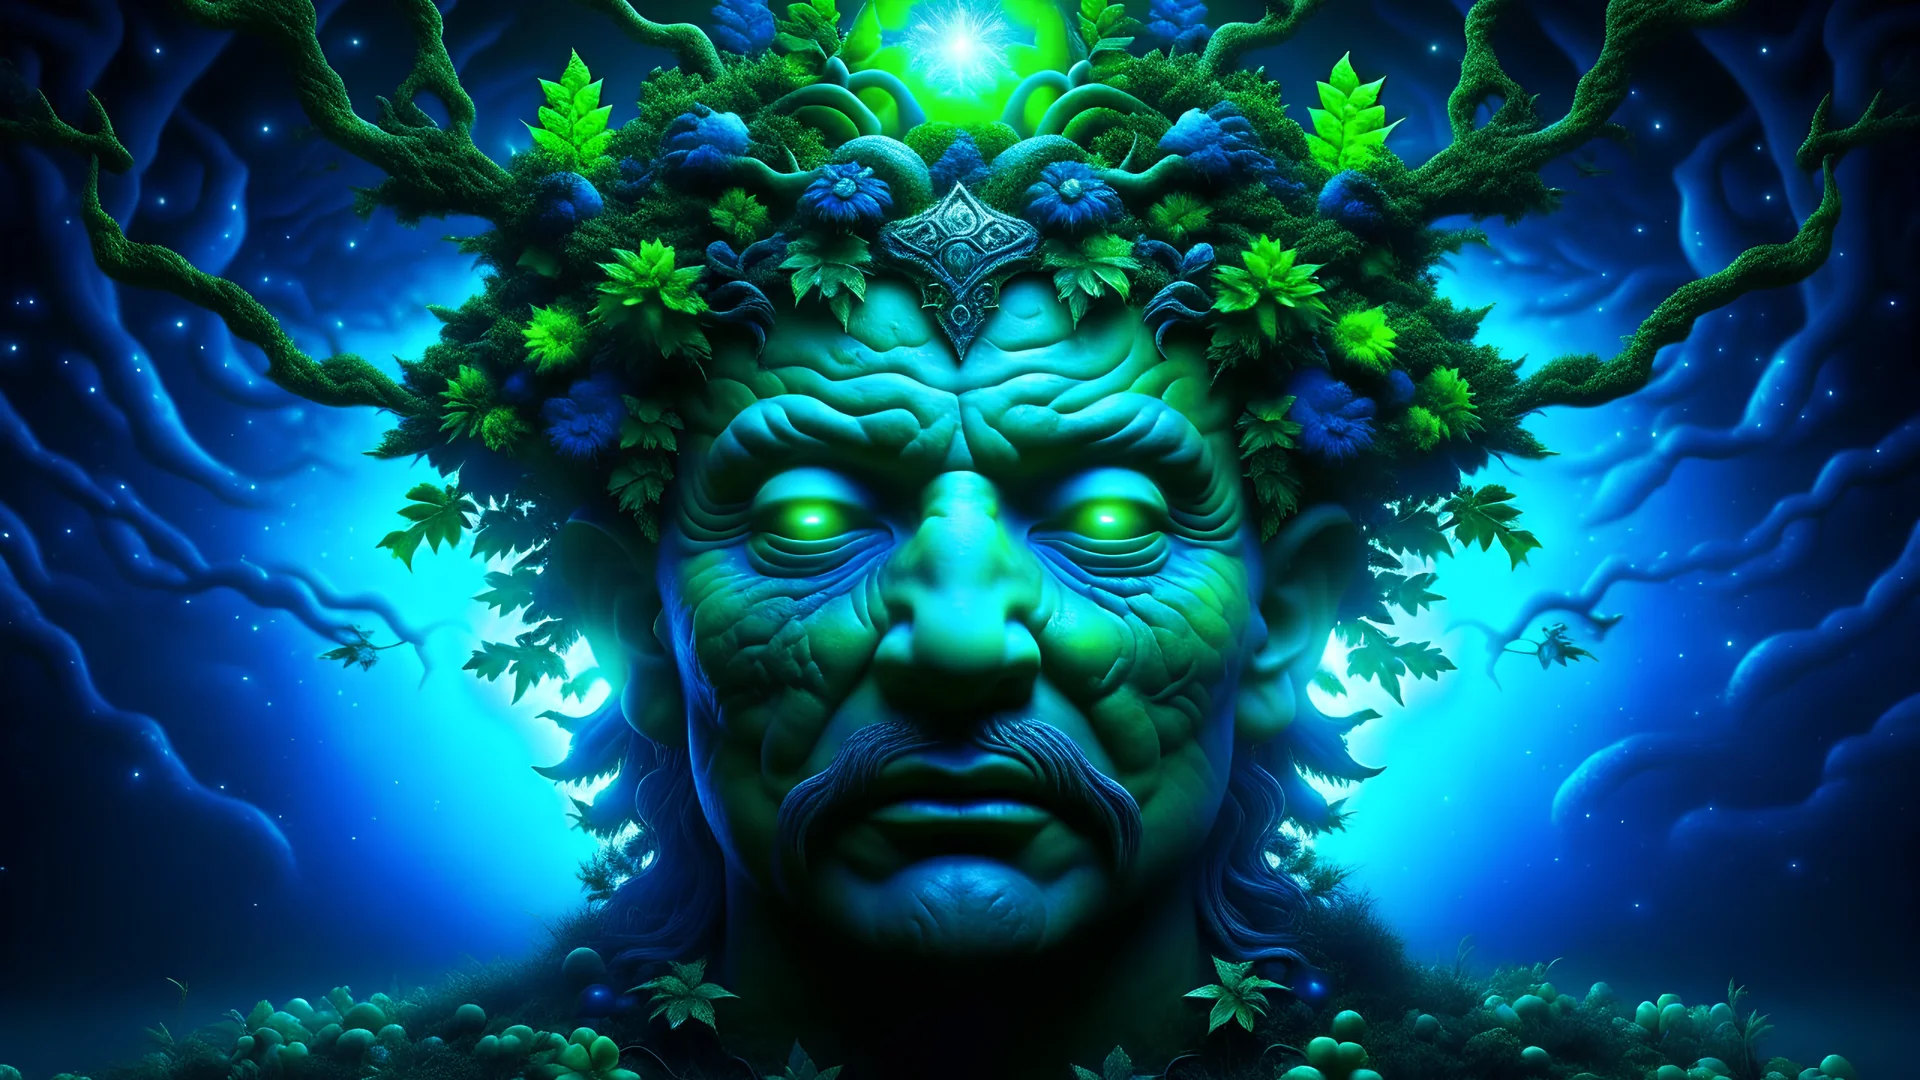 Night Of The Green Man|| Celtic/Irish symbols, surrealism, magic realism, in the styles of Otto Rapp and Albane Simon and Philippe Druillet, mixed media, Phthalo colors, cinematic lighting, sharp focus, highest resolution